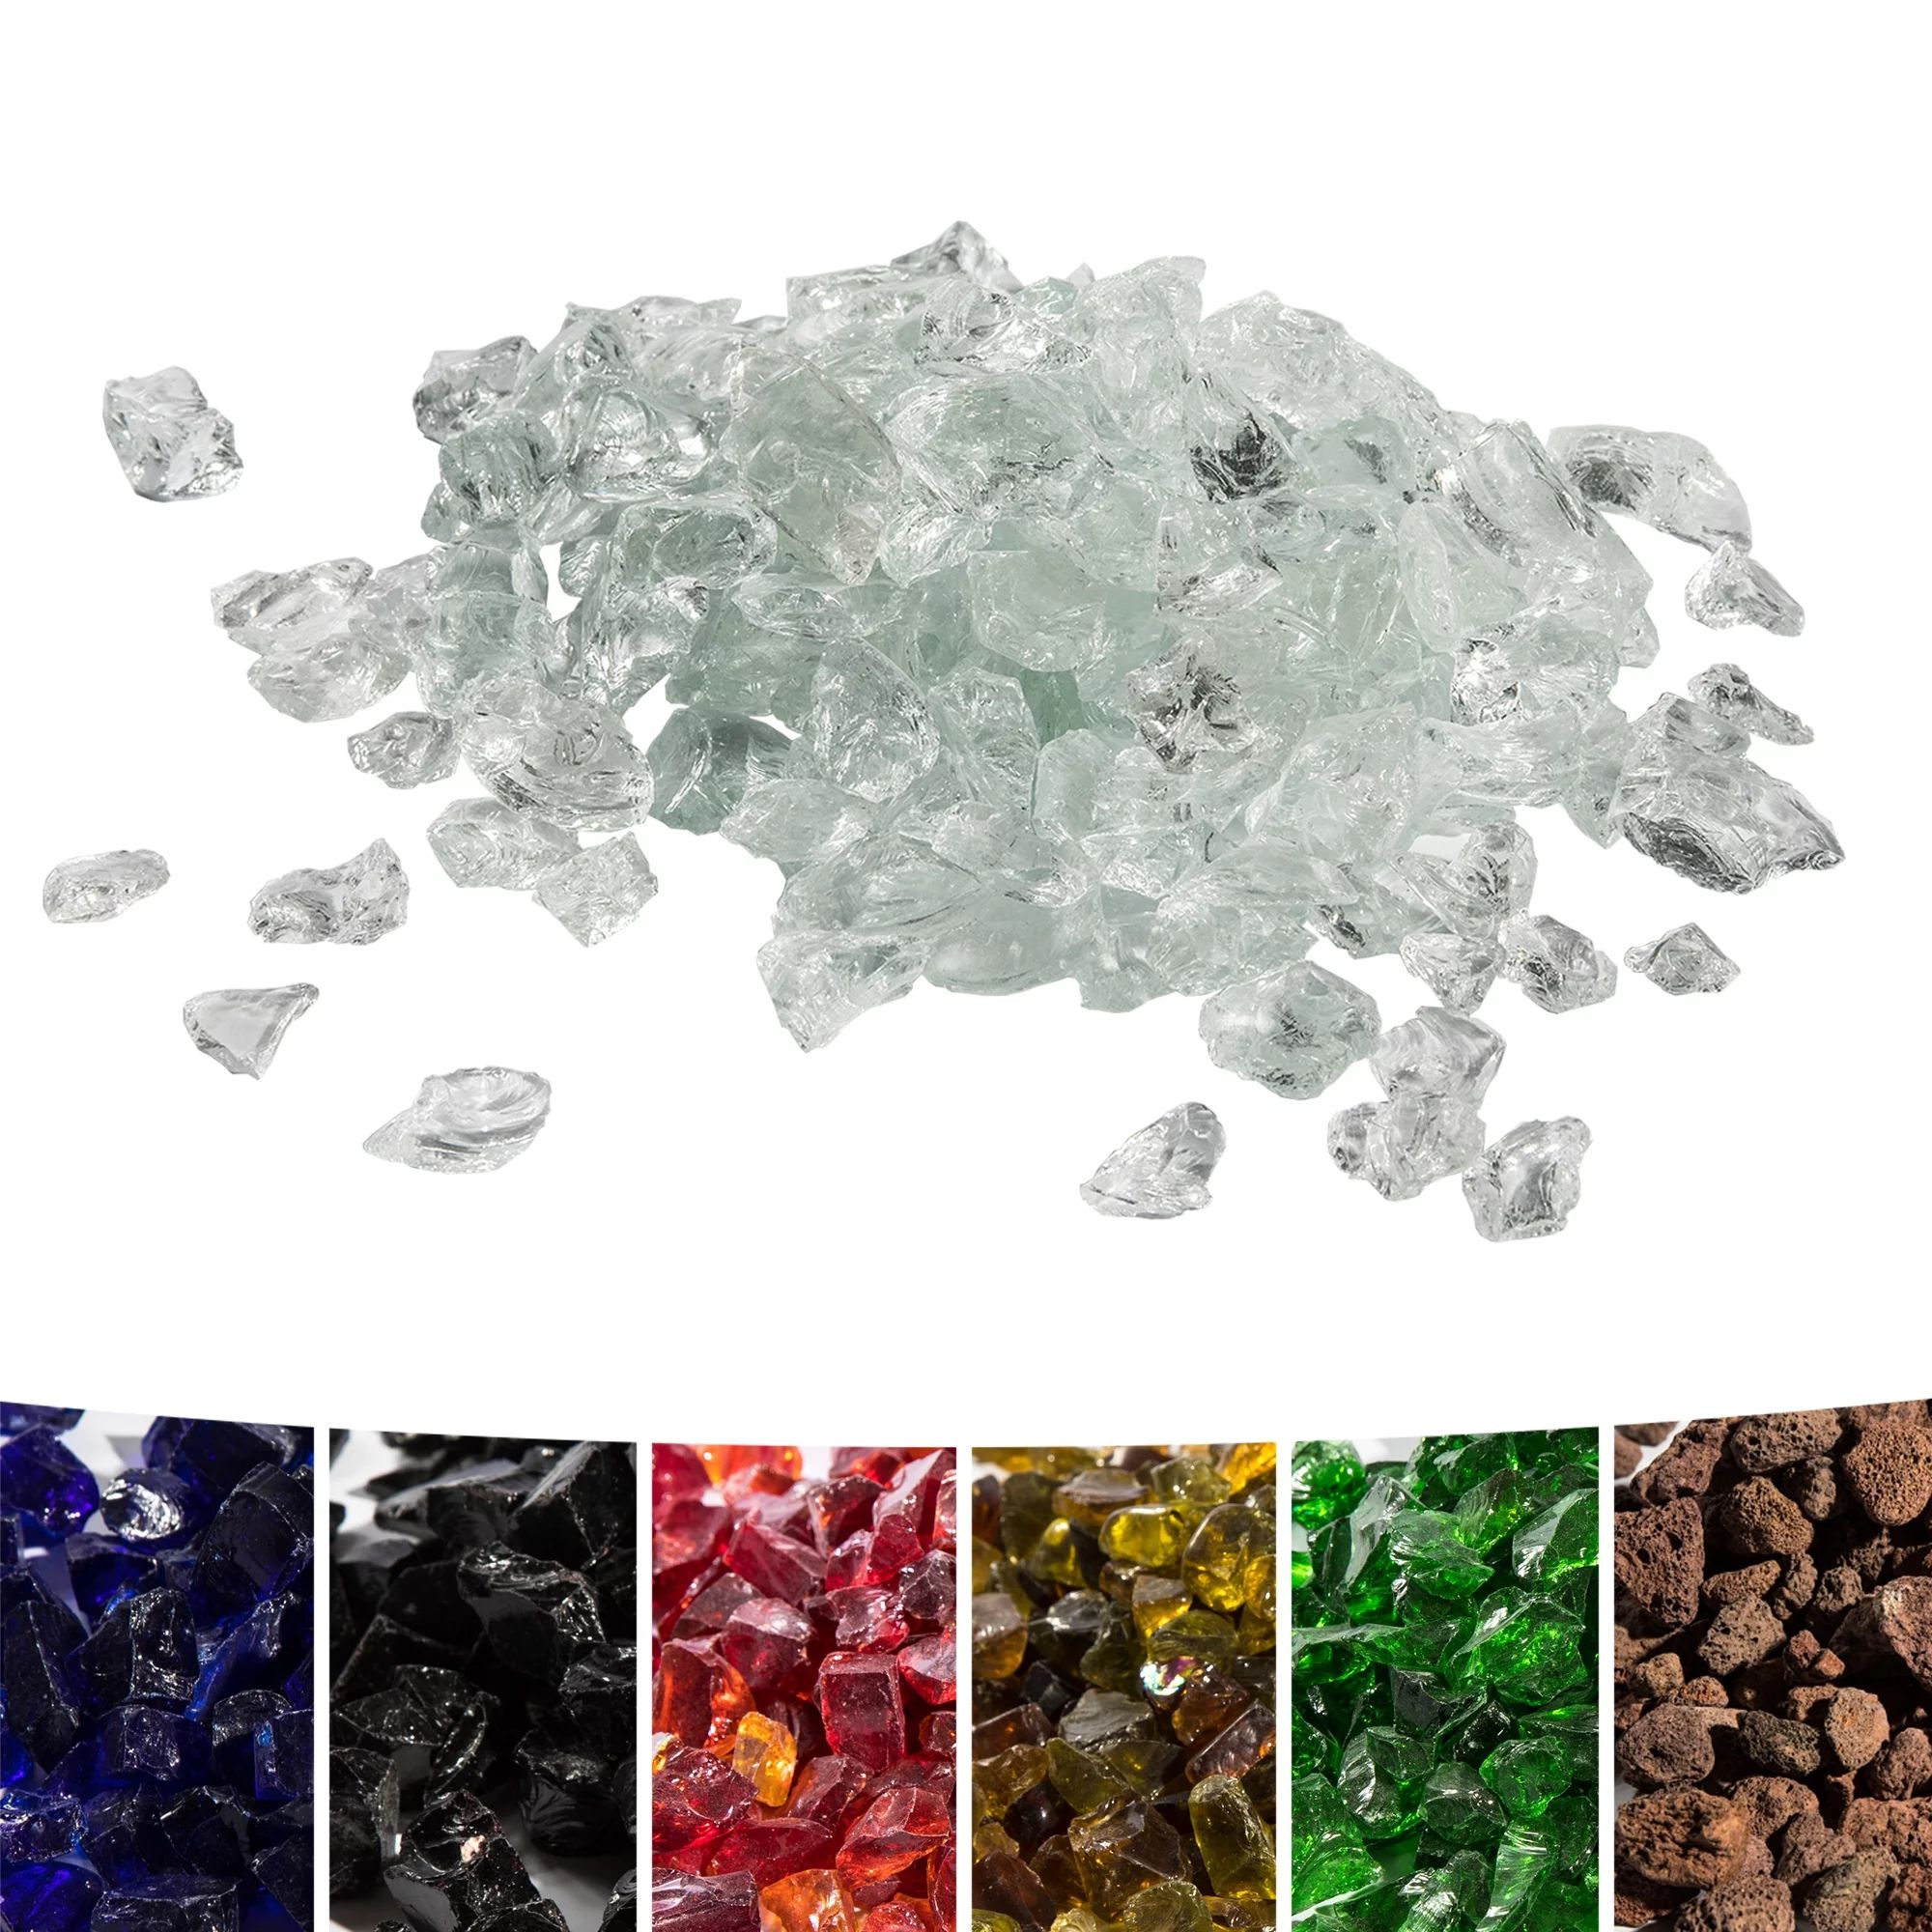 Teamson Home 1/2 Inch Reflective Fire Glass for Fire Pits 9 lb / 4 kg Bag, Clear | Walmart (US)